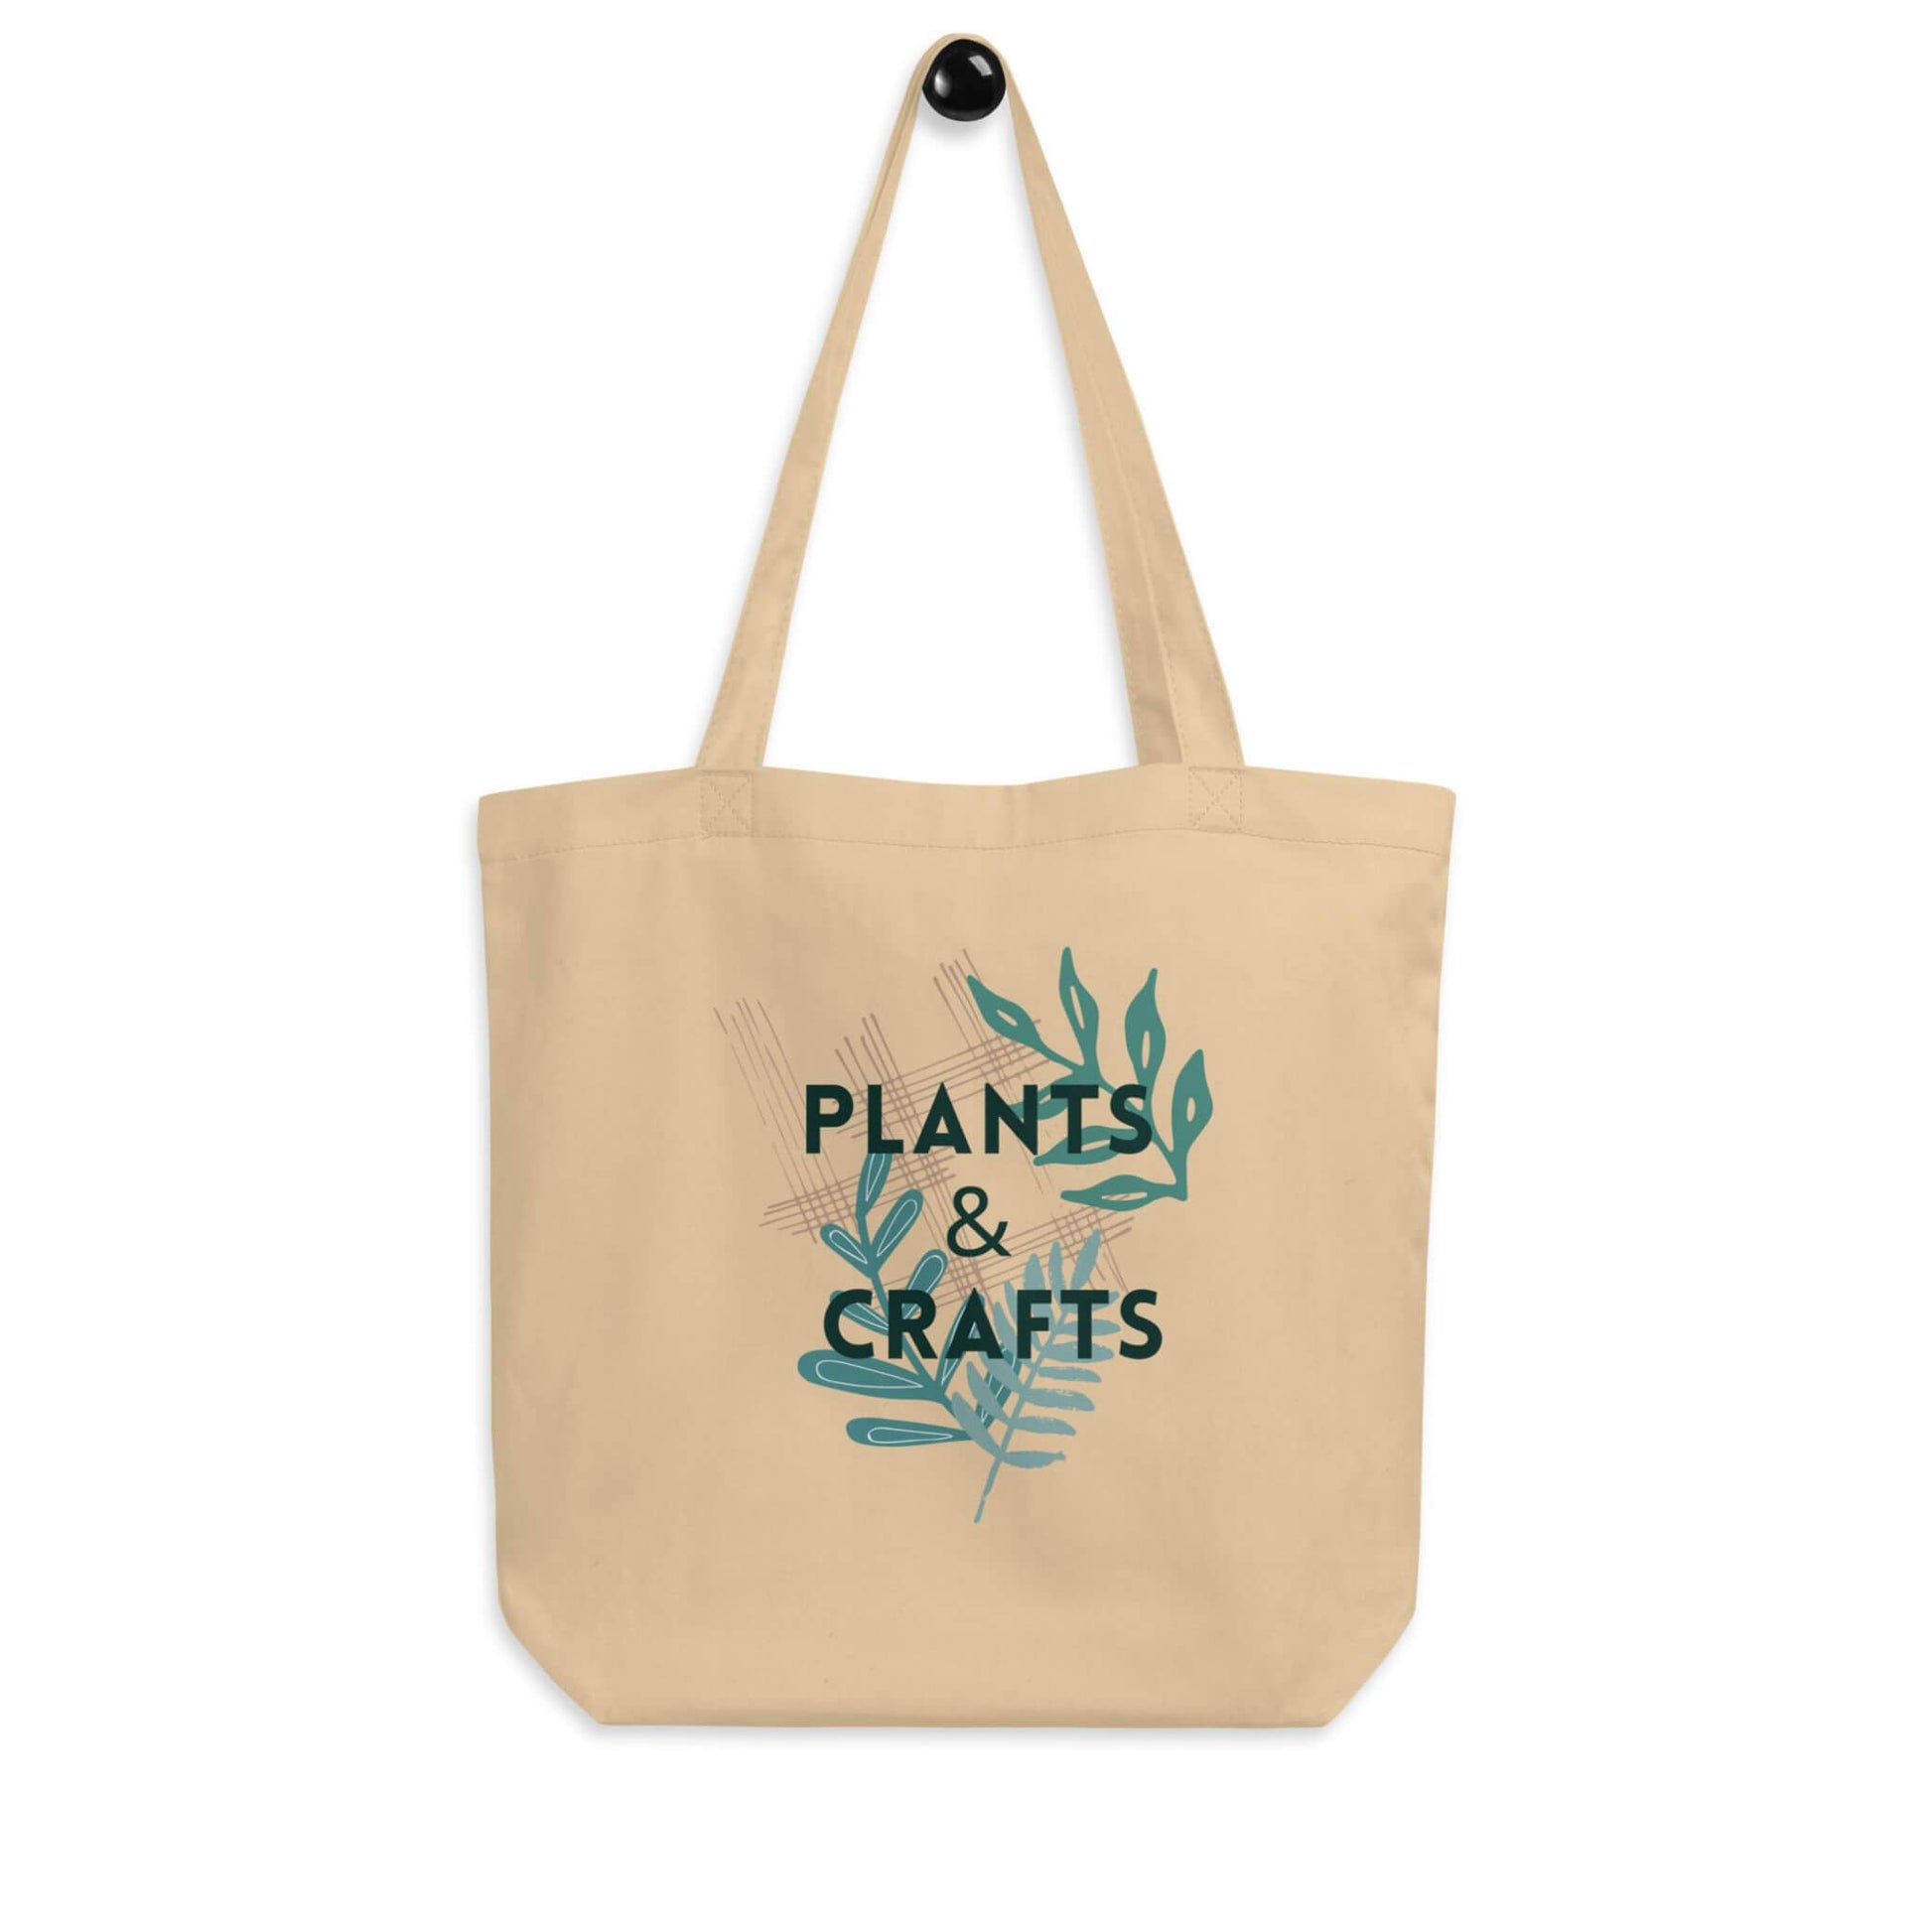 Plants and Crafts Tote Bag - Wear and Woven